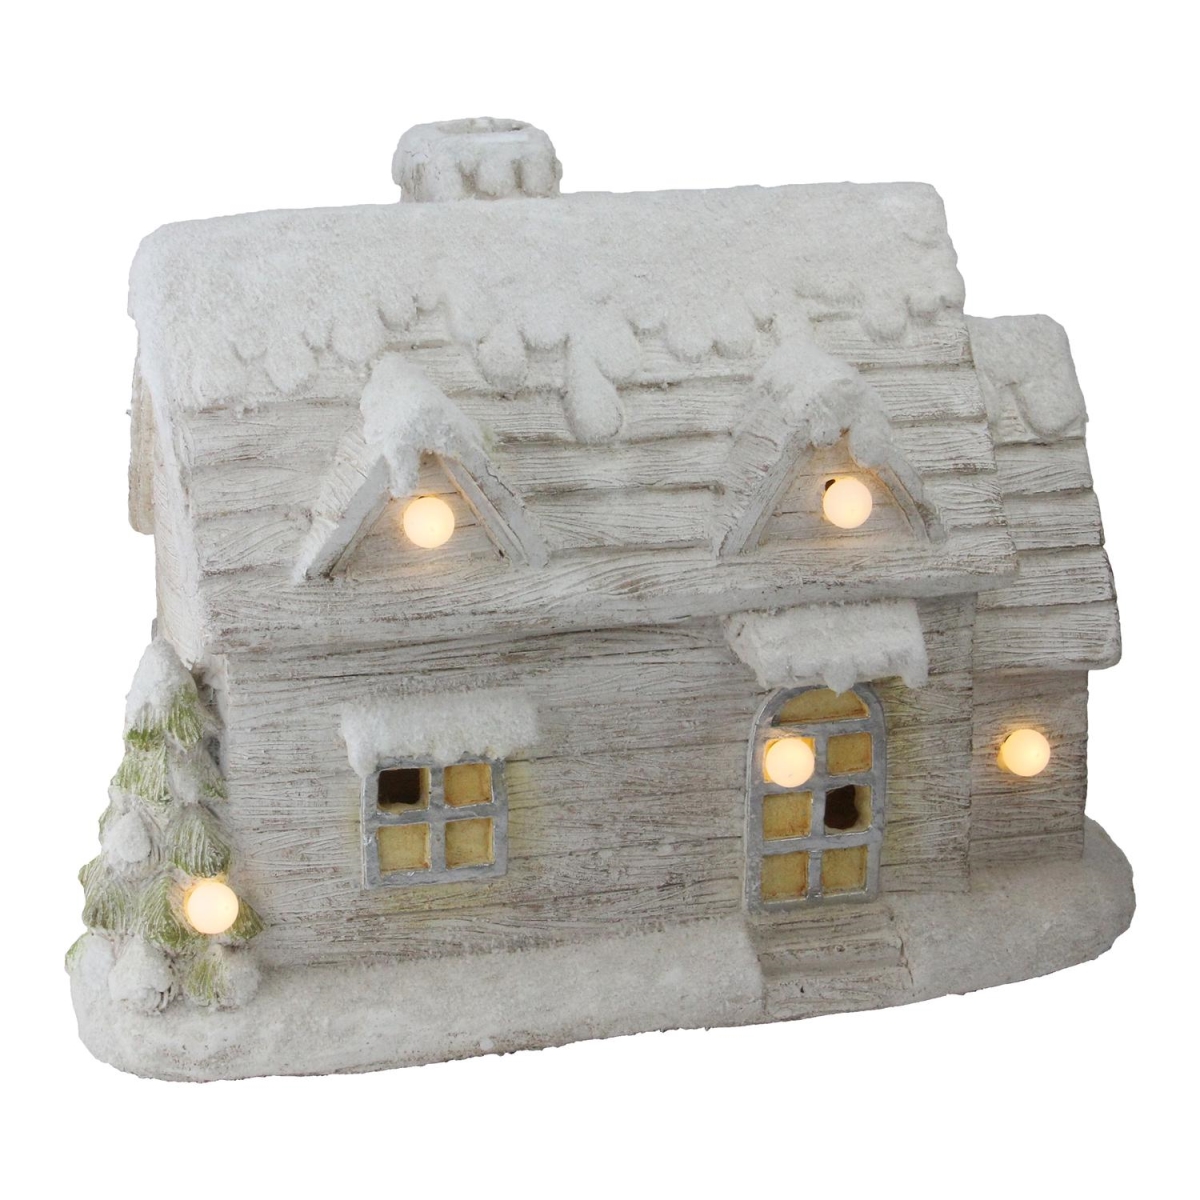 32625571 14.5 In. Musical Snowy Cottage Christmas Decoration